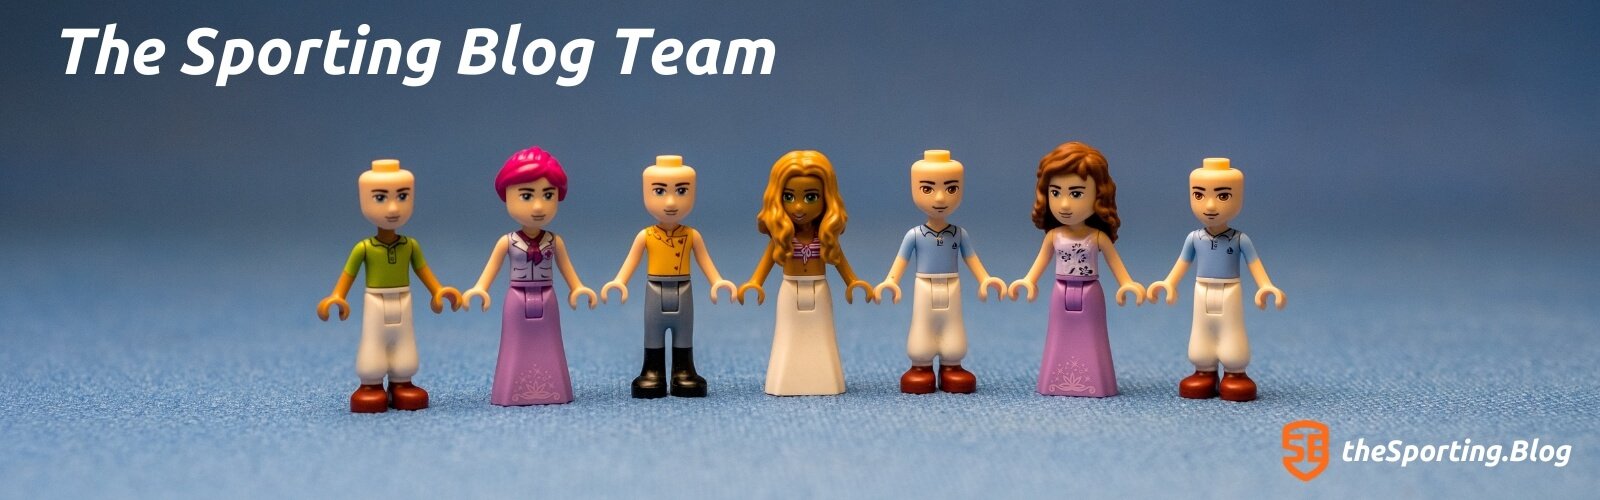 Lego figures holding hands with the tite 'The Sporting Blog'